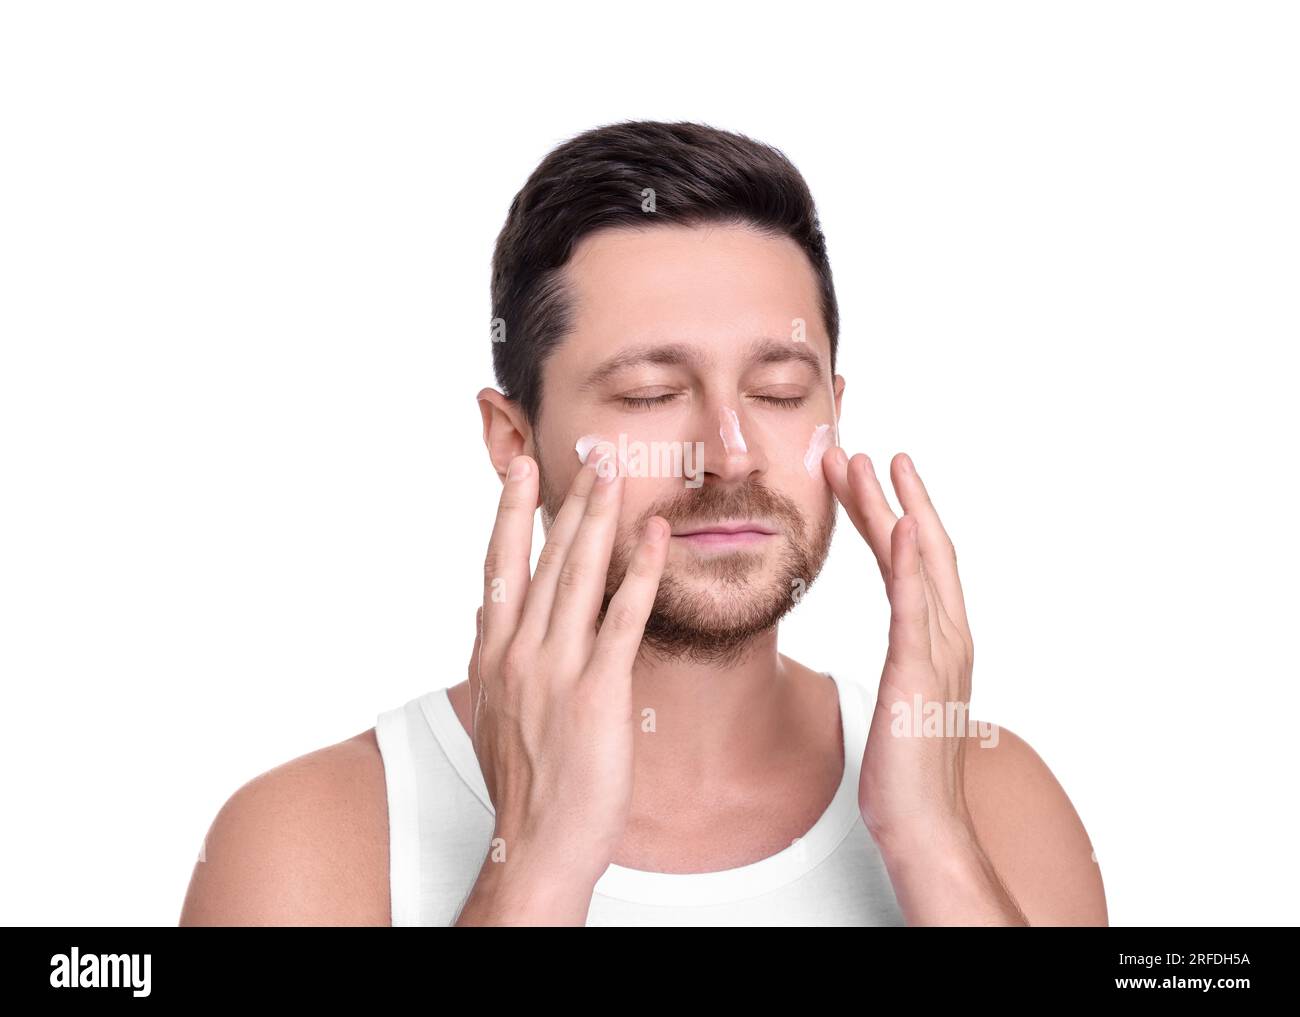 Man applying sun protection cream onto his face against white background Stock Photo